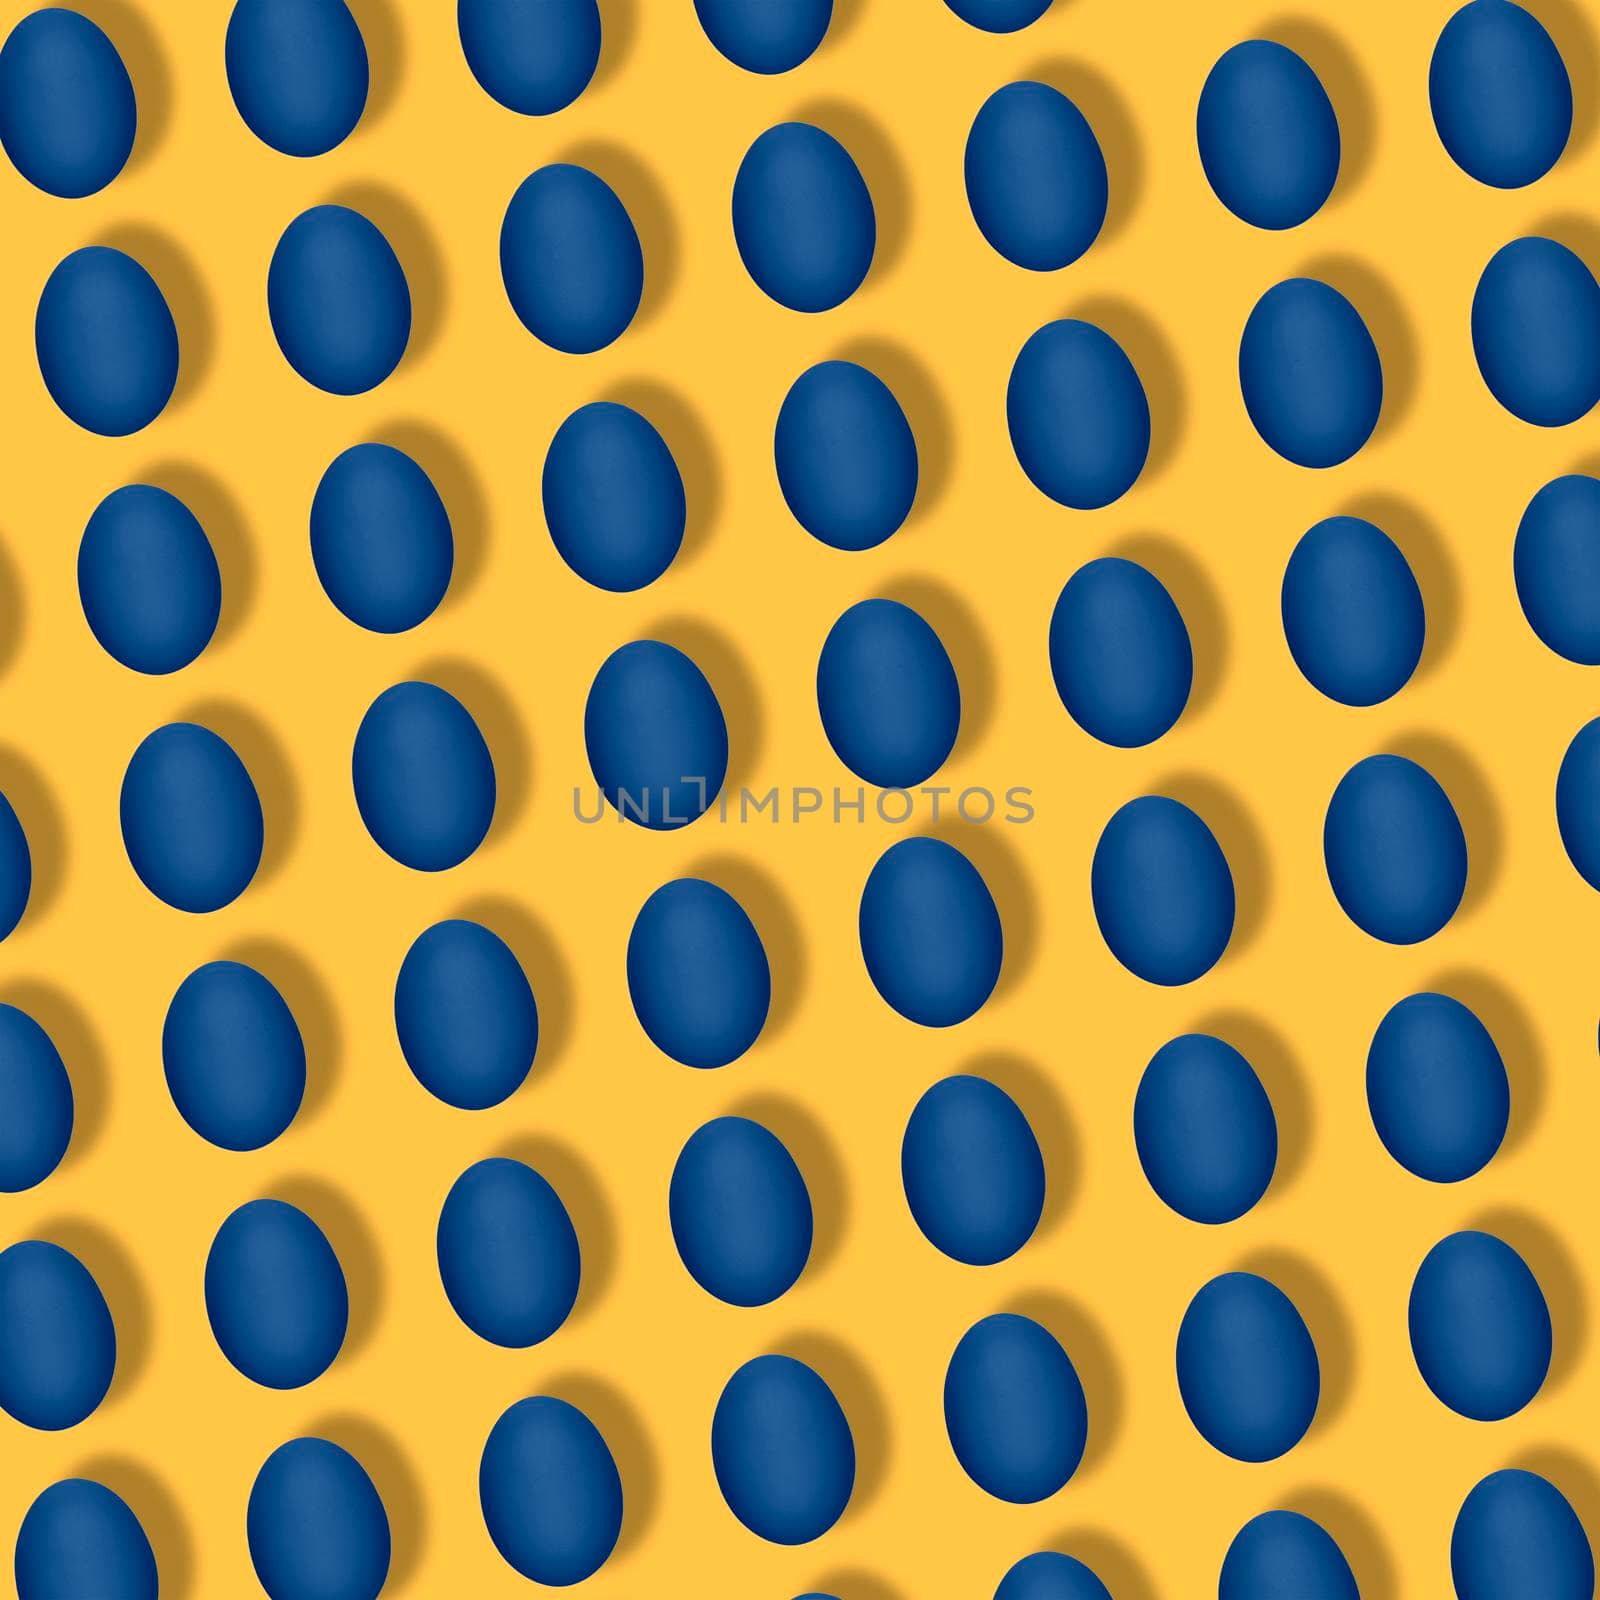 Pattern made of blue eggs on yellow or orange background. Minimal food concept. Flat lay, top view. Pop art design, creative easter concept in minimal style.